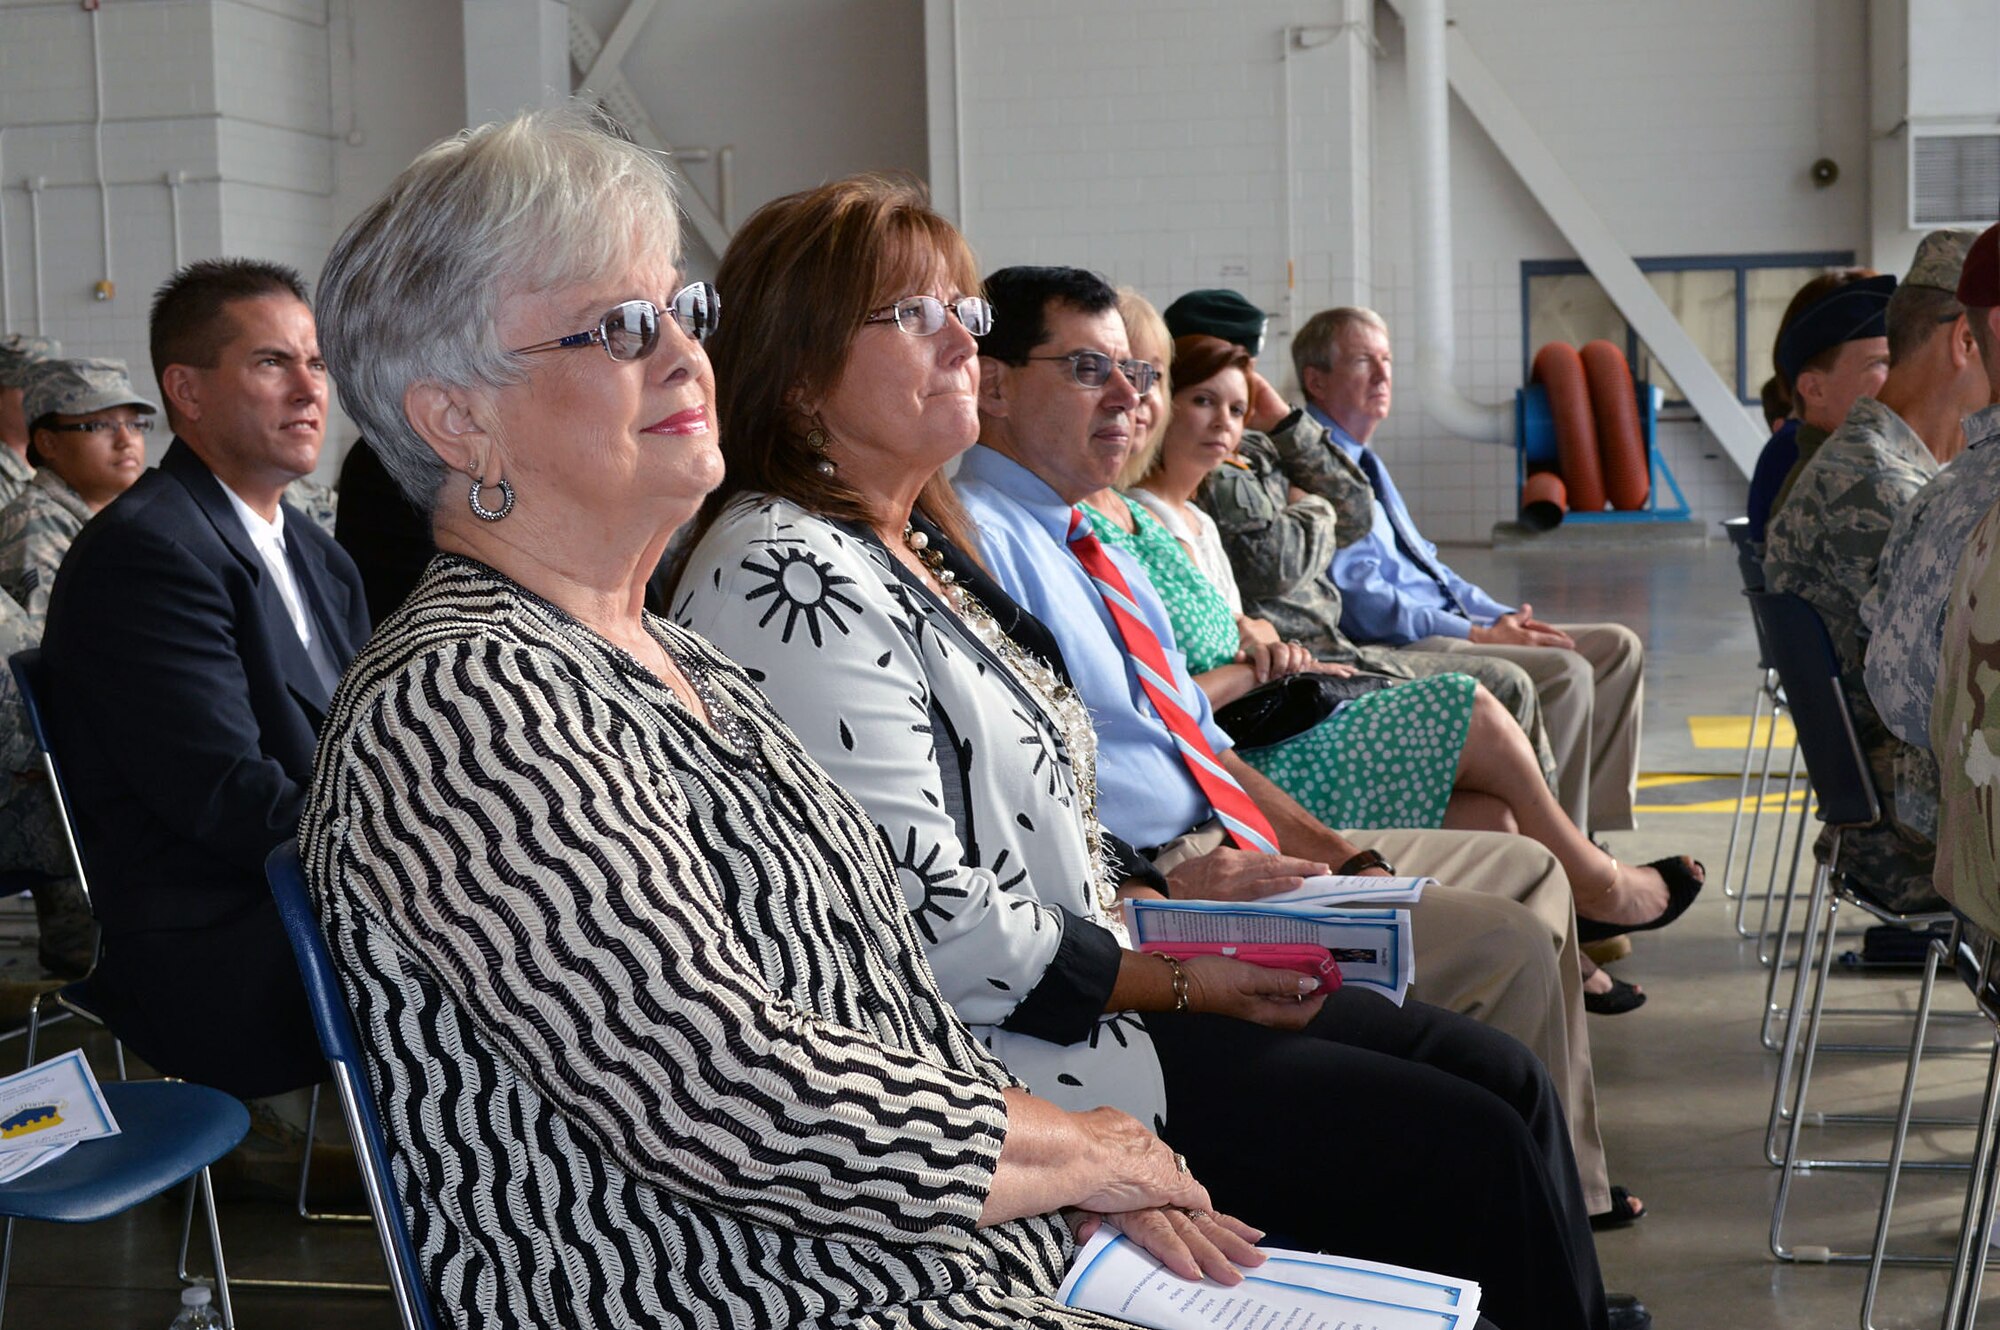 Mayor Patsy Carson from Erwin, N.C., and other local, civic and military leaders listen to comments provided by Col. Kenneth E. Moss, 43rd Airlift Group commander, during the 43rd Airlift Group’s change of command ceremony on Aug. 5, Pope Army Airfield. Moss took command from the outgoing commander, Col. Daniel H. Tulley, who moves on to his next assignment as the commander for the 6th Air Mobility Wing, MacDill Air Force Base, Fla. (U.S. Air Force photo/Marvin Krause)